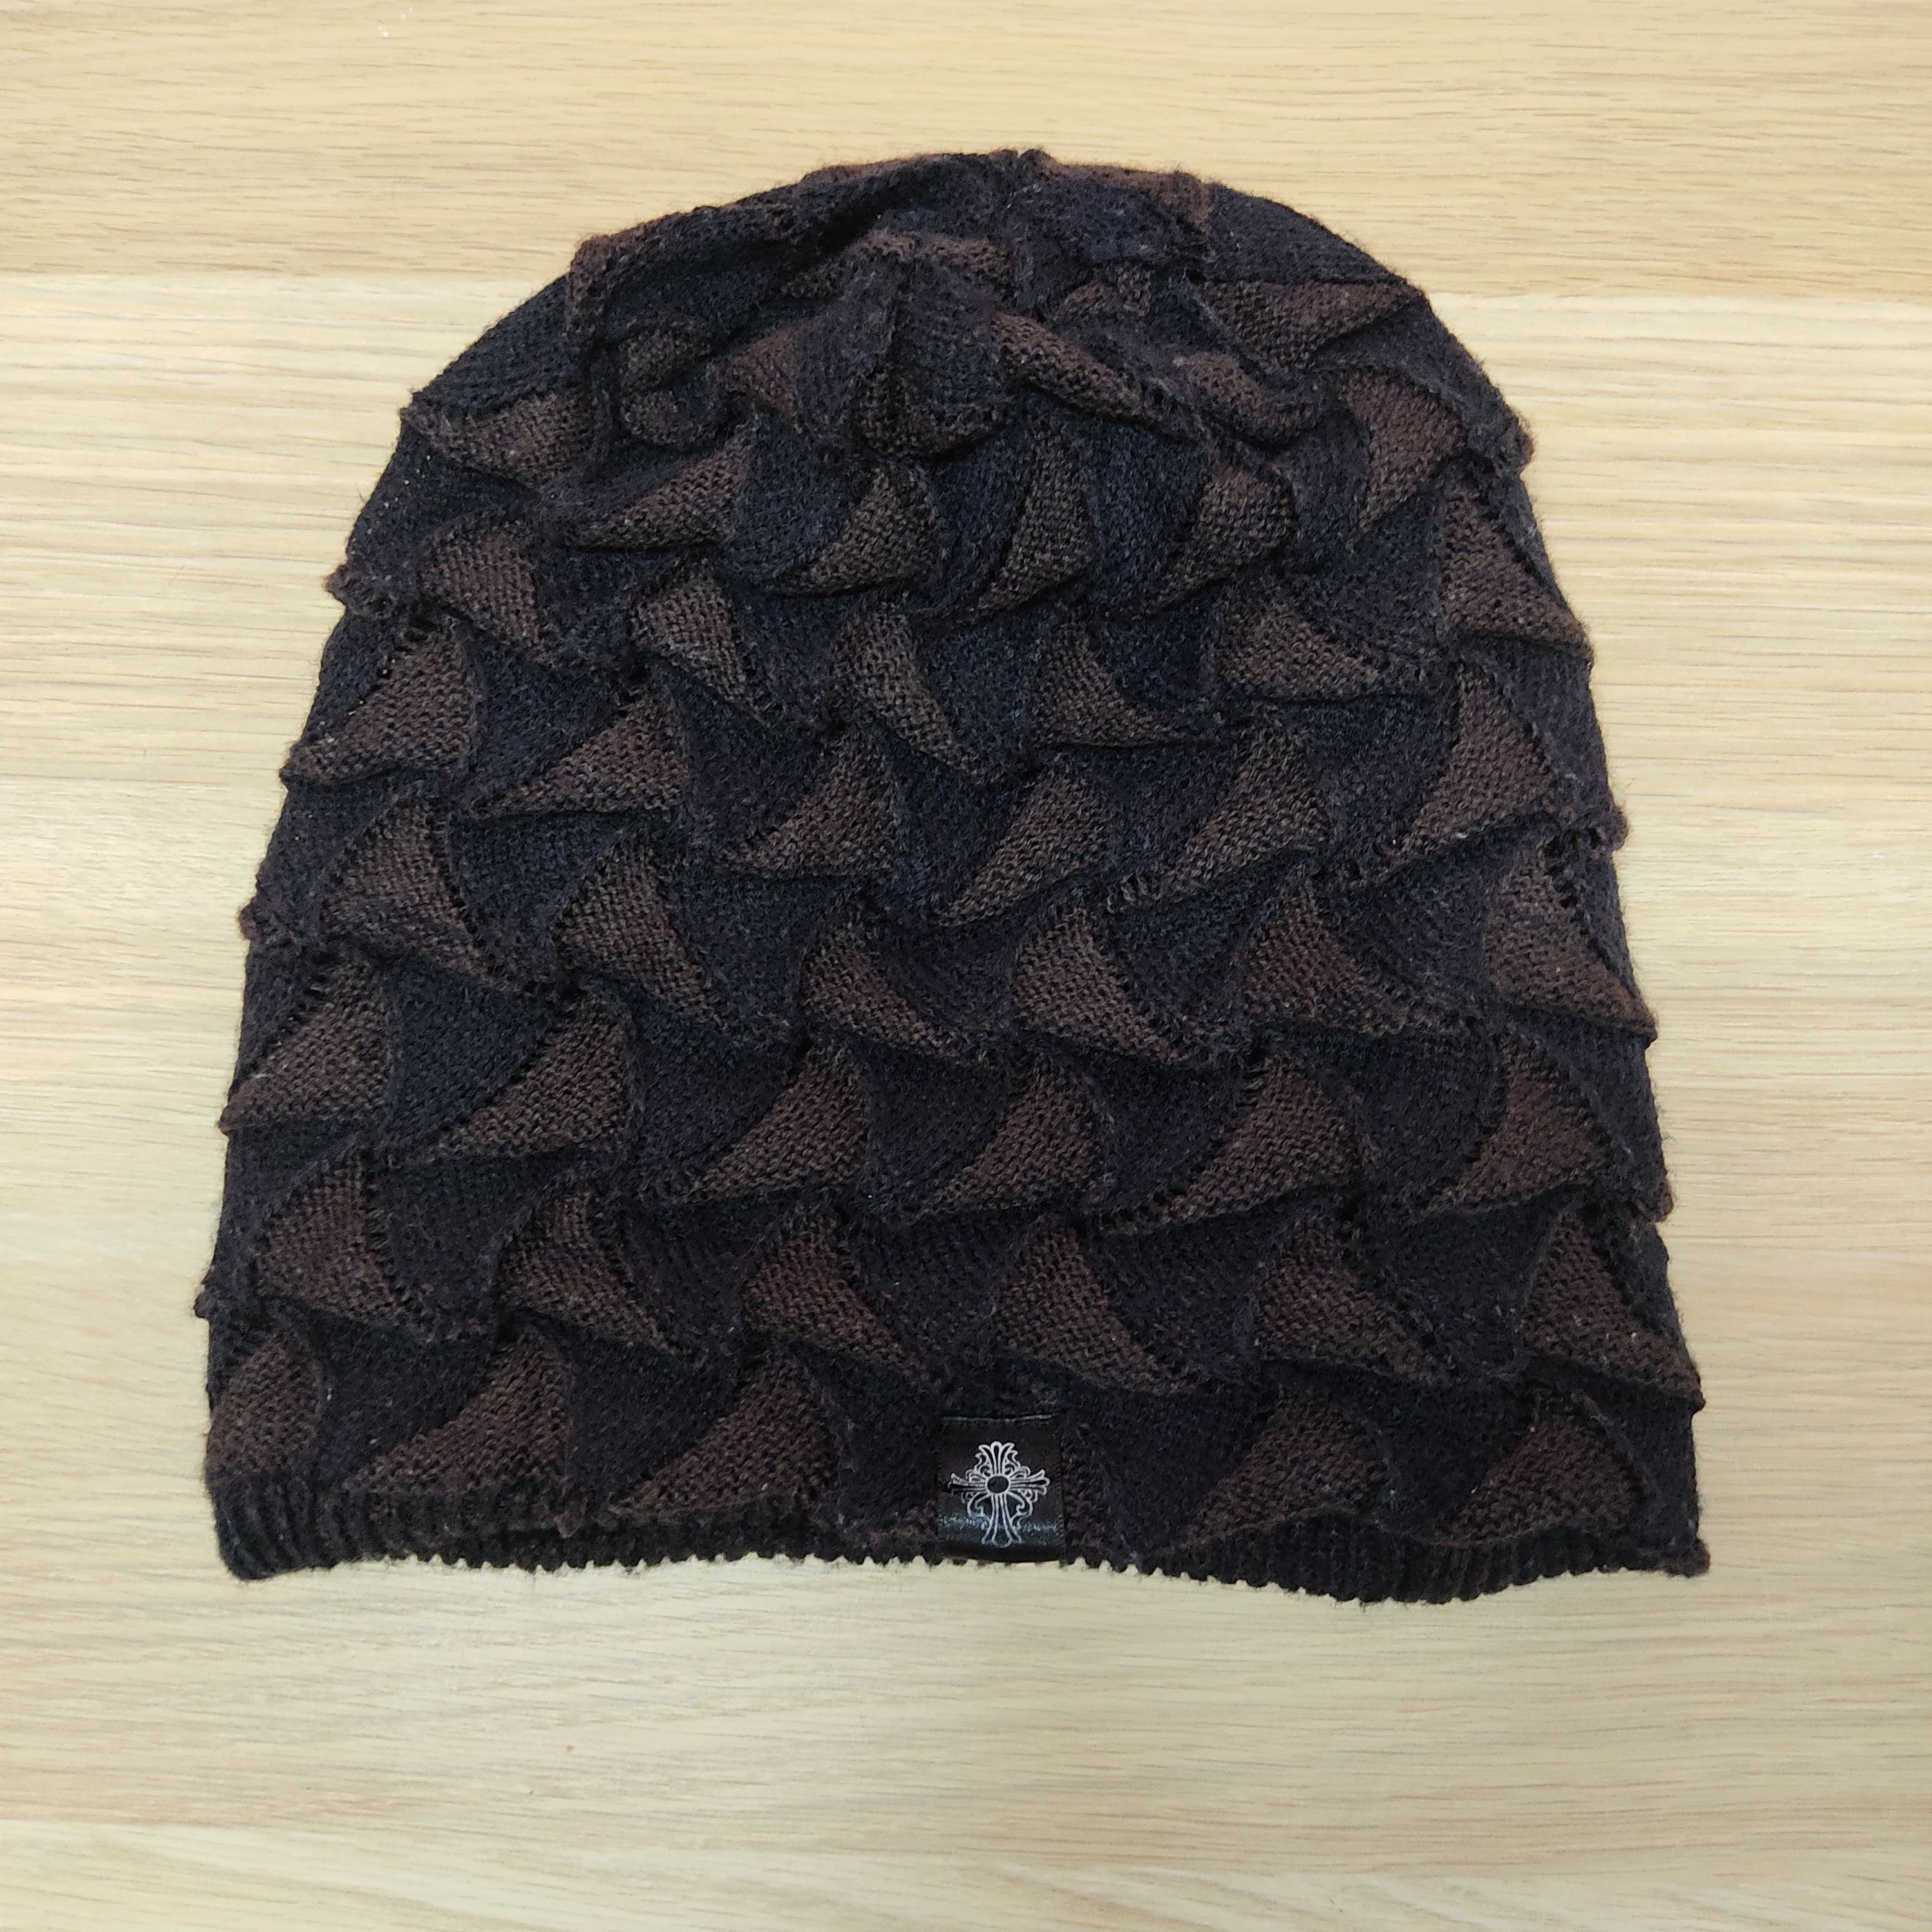 Rare - Reversible Knitted Chrome Hearts Inspired Pattern Beanie - 2